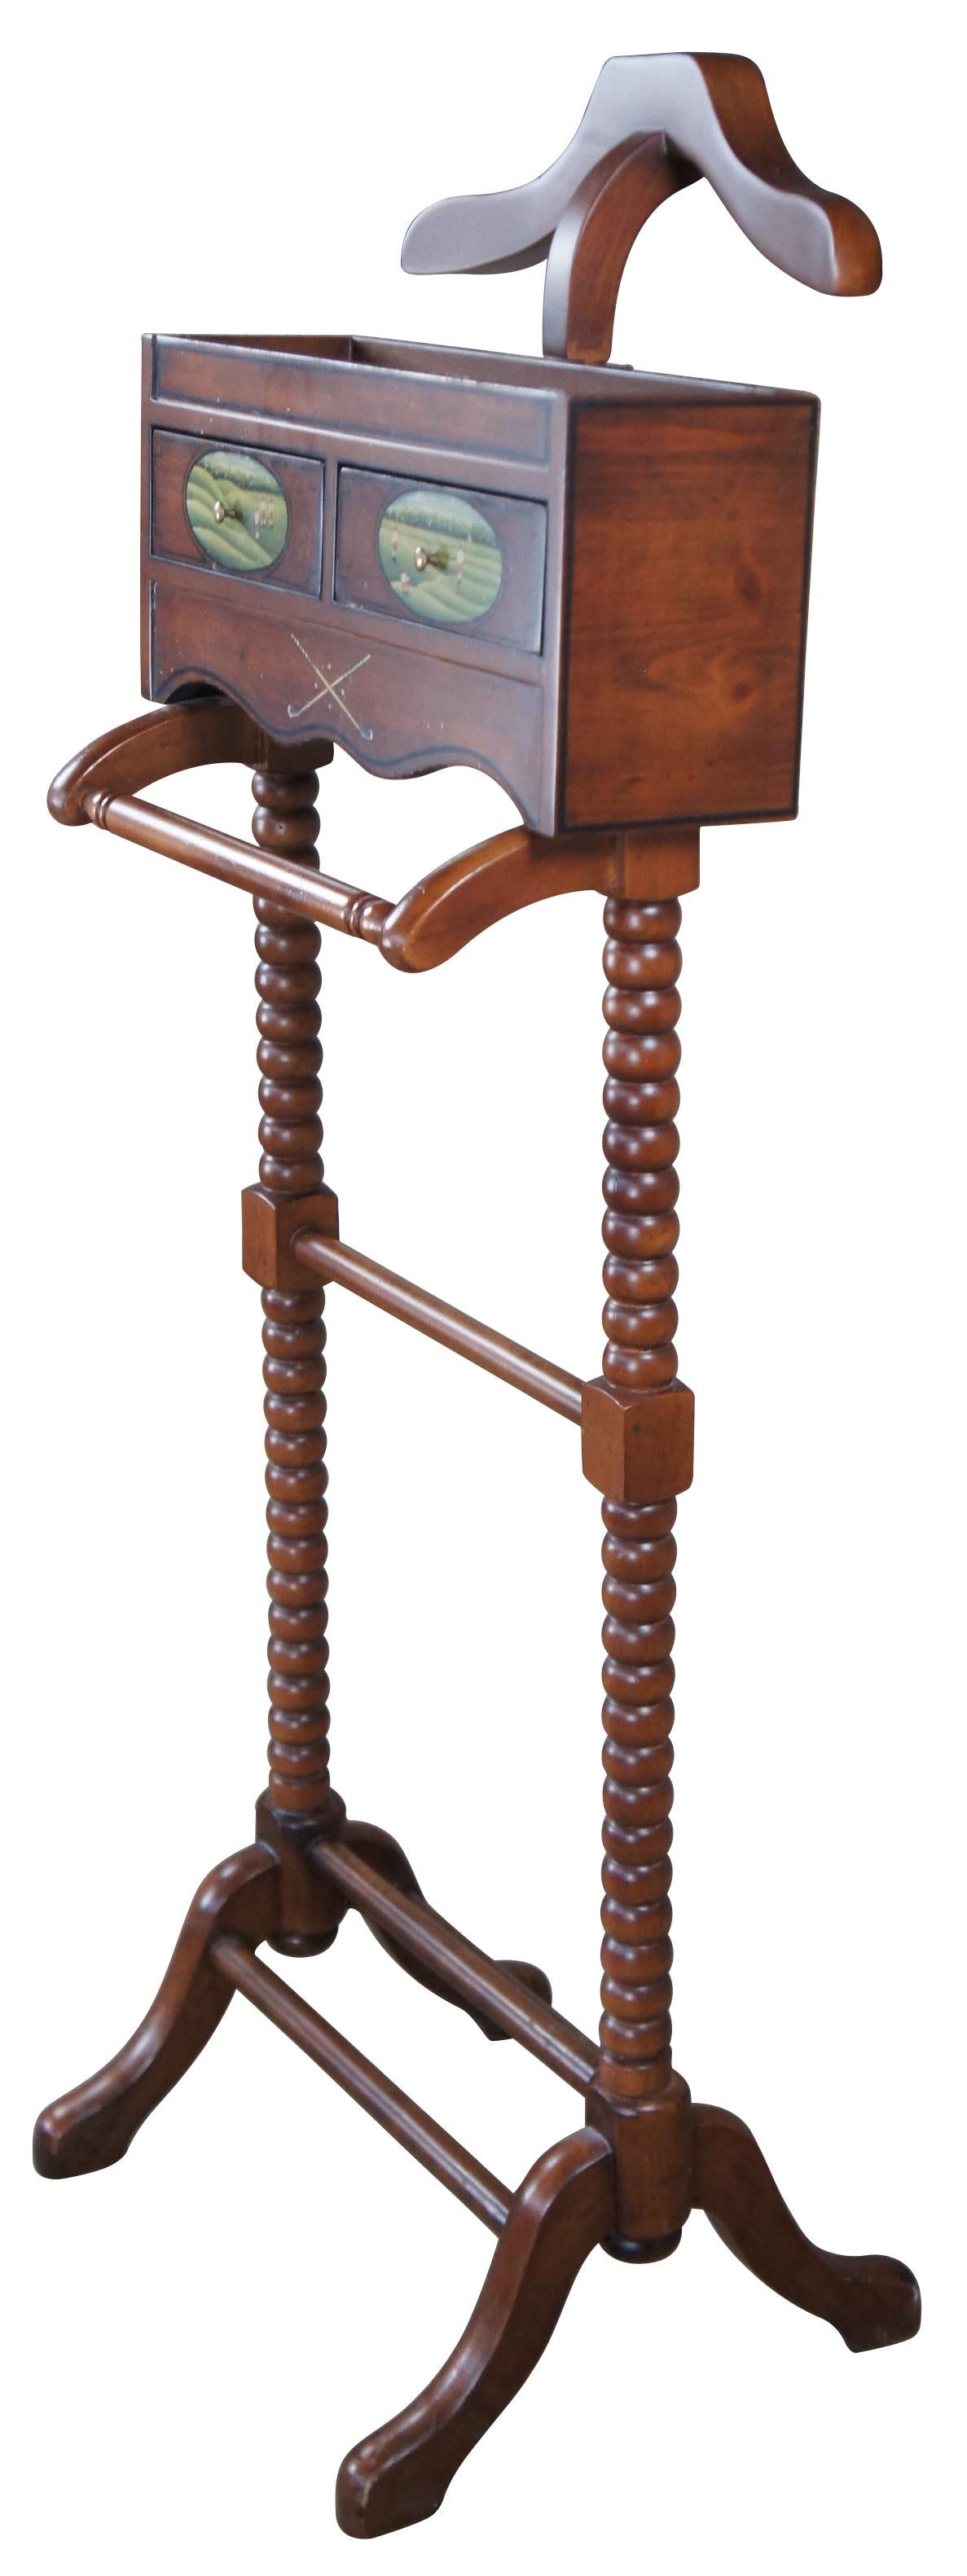 Italian Regency style dressboy or clothing valet stand, circa late 20th century. A ribbed design with towel or trouser holder and removable hanger. Includes two felt lined drawers and tray along top.
 